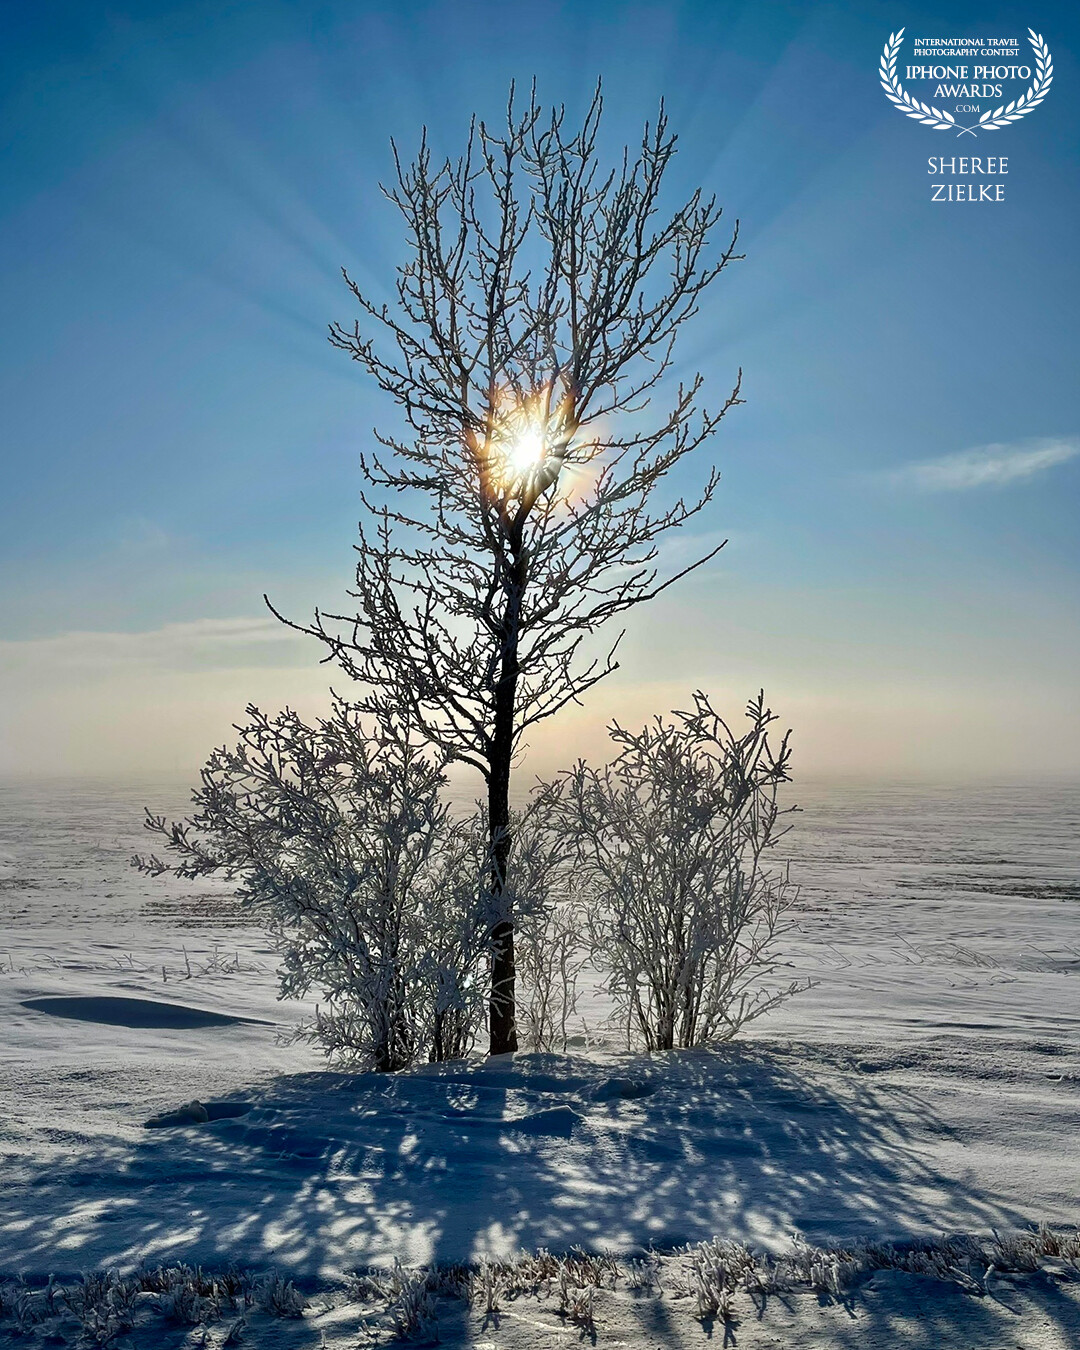 We were driving along country roads in Alberta, thick with fog. Although slippery, my husband managed to make a stop when I espied this pretty shot. A little trial and error put a sun star in the perfect nestled position in the branches. The splayed God’s rays and deep long shadows provided balance for this spindly group of trees.